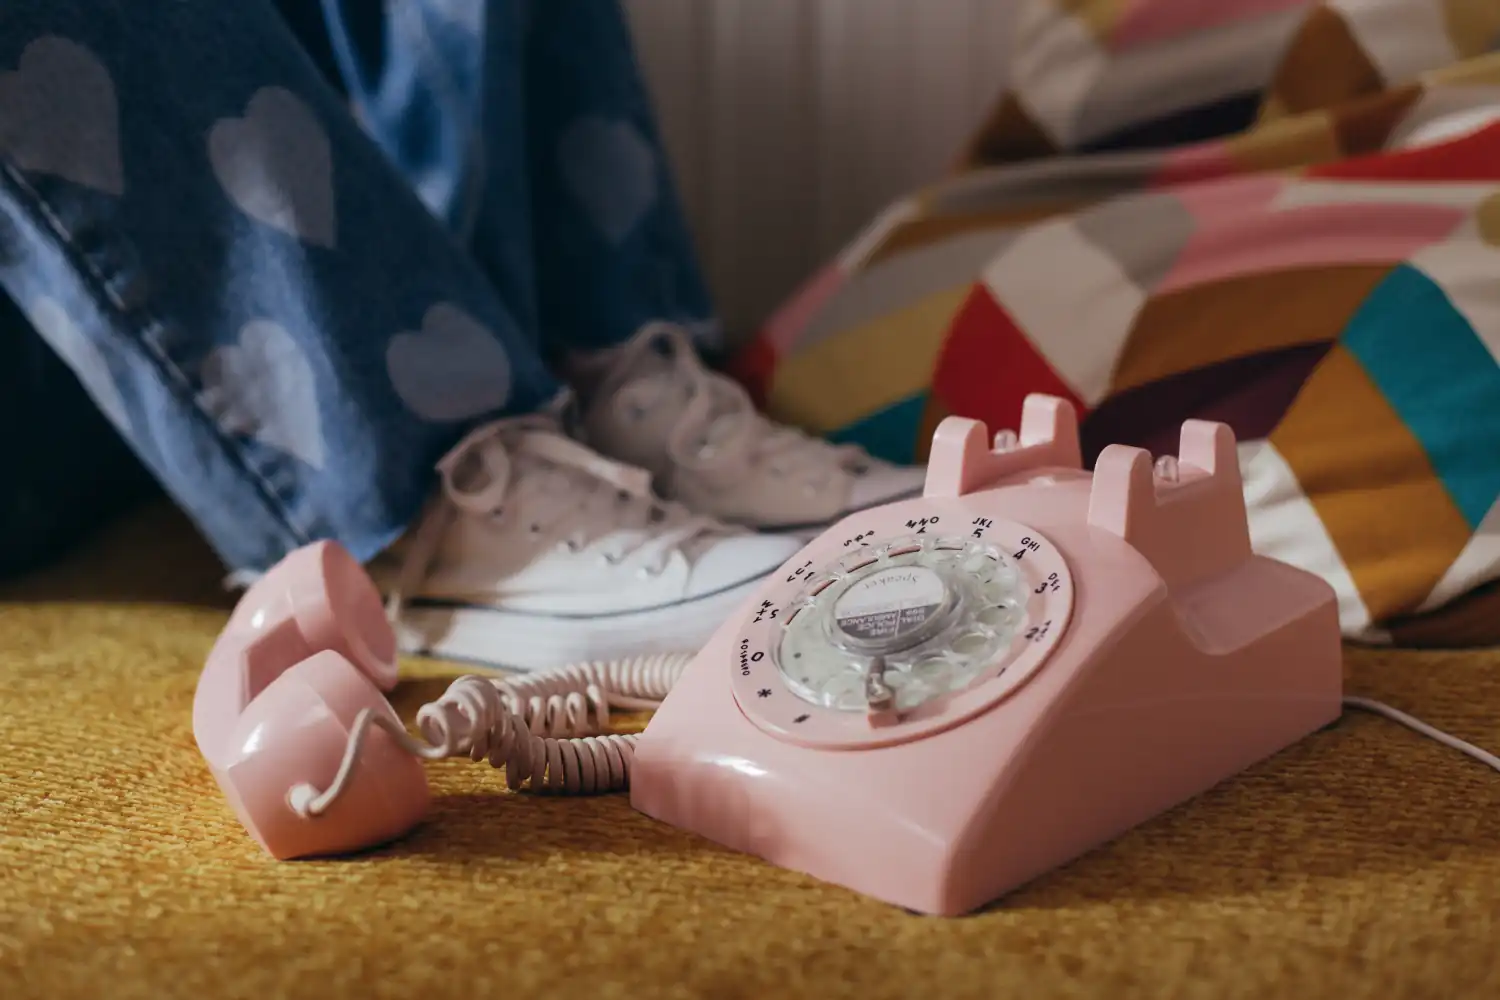 Nostalgia: Rotary phones and hearts on jeans